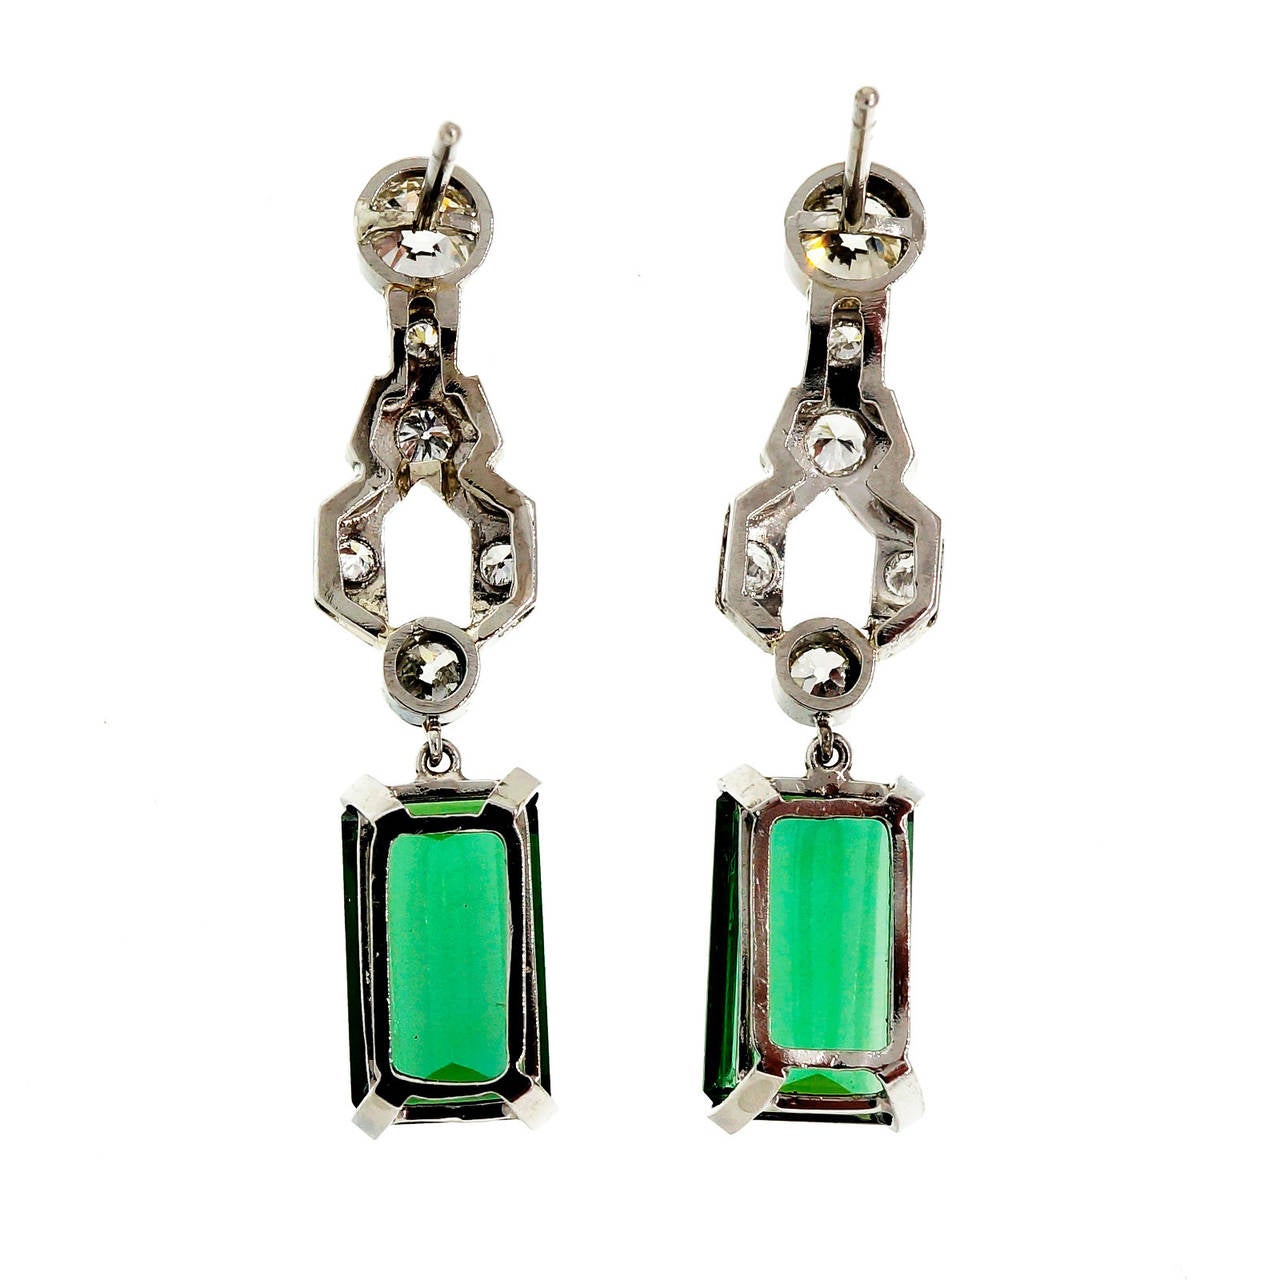 Platinum dangle earrings with old European cut diamond tops, diamond dangles and bright pure green Emerald cut Tourmaline dangles.

2 Emerald cut bright green Tourmalines, approx. total weight 6.20cts, VS, 12 x 6.5mm, natural color
2 old European